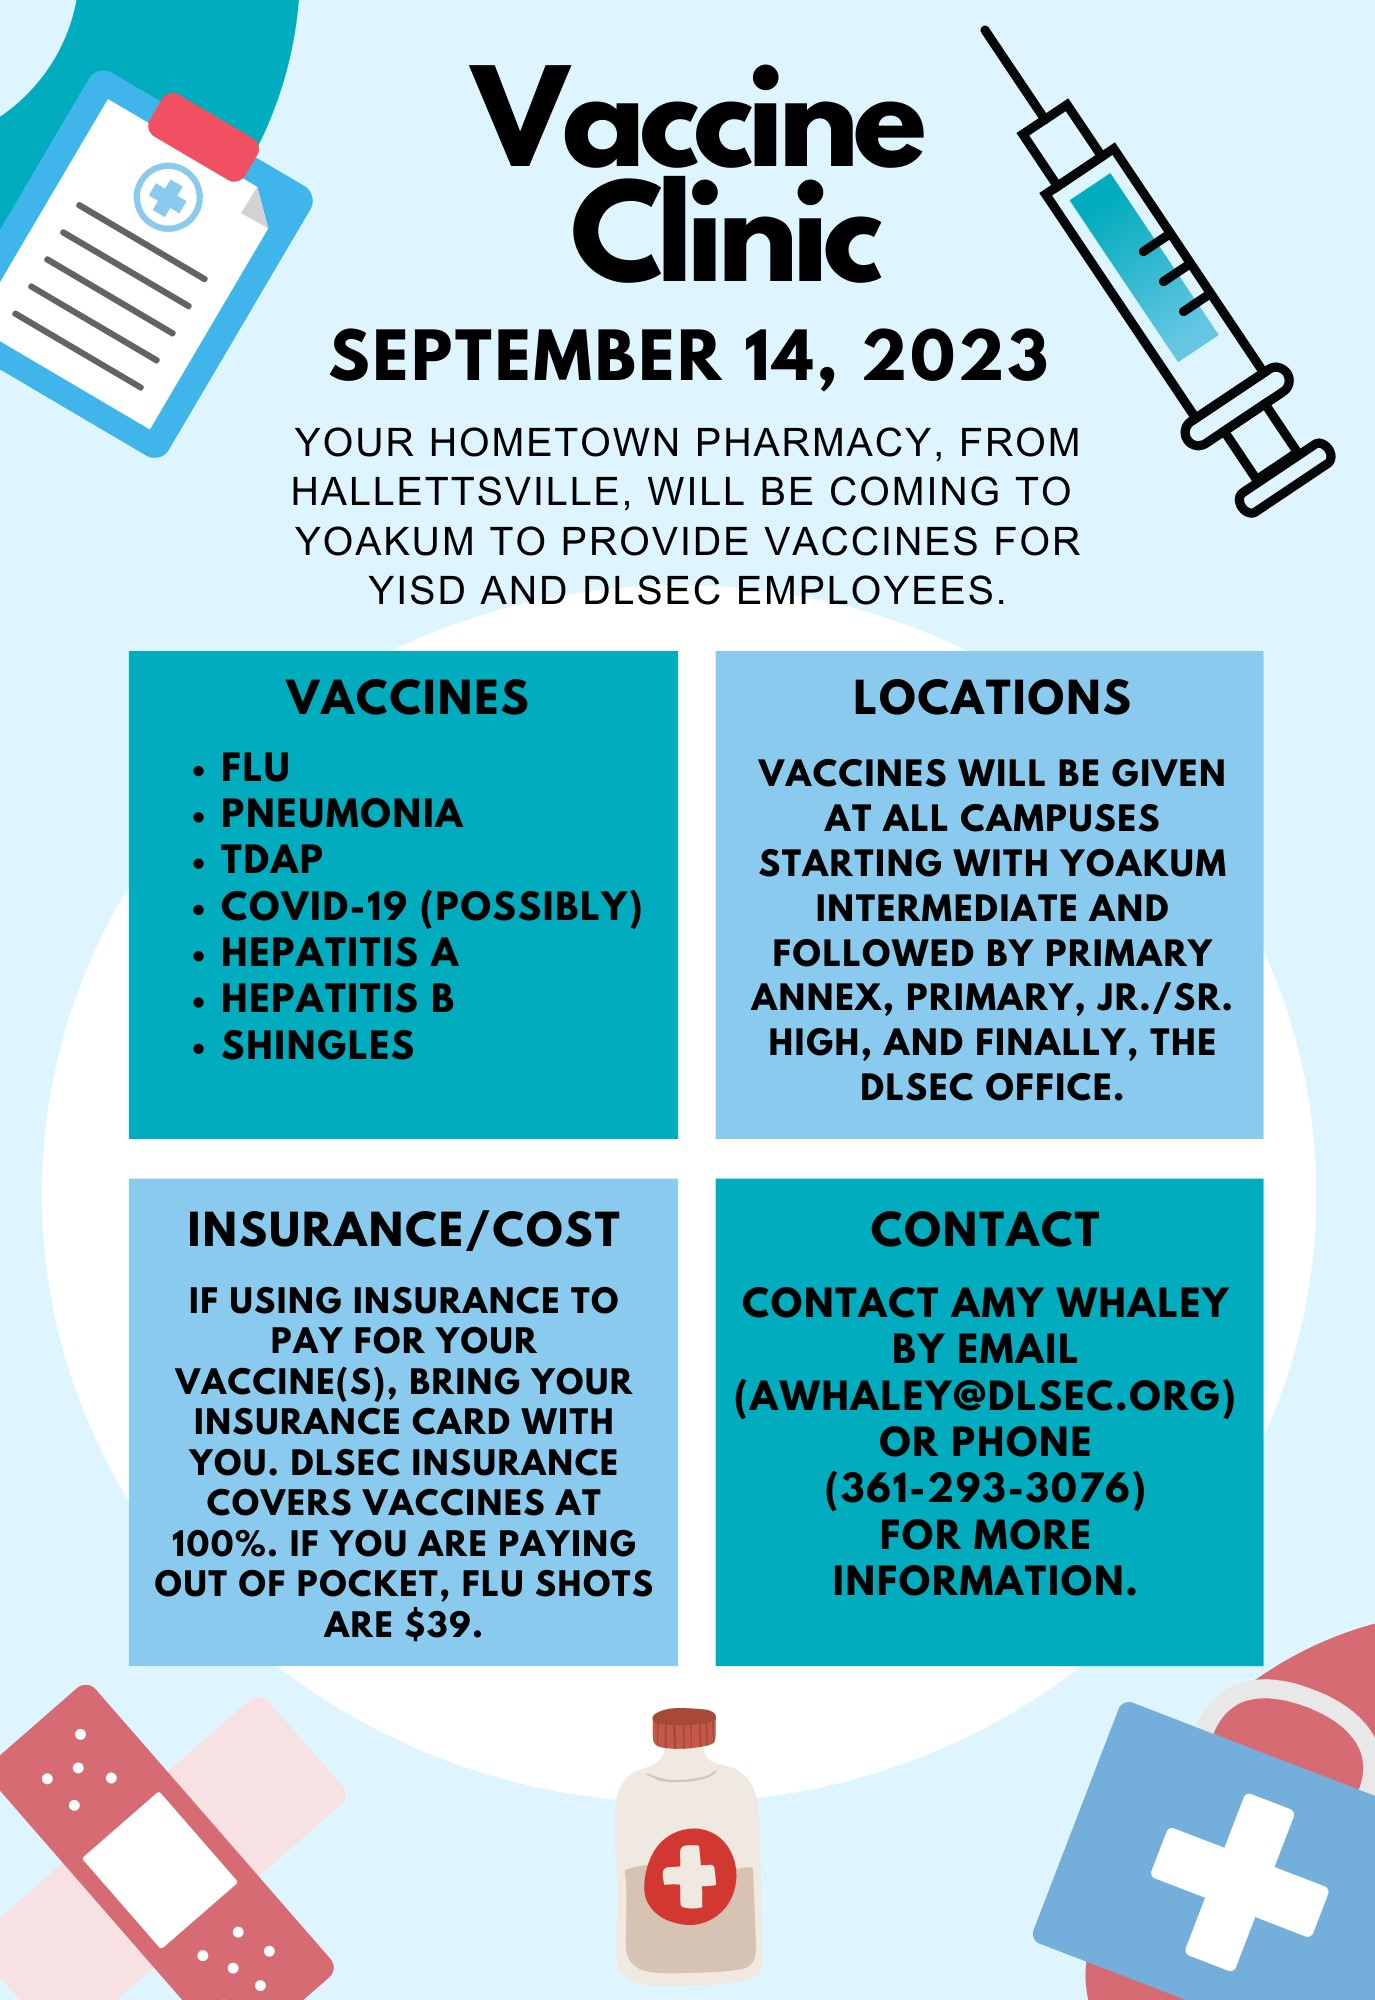 Information about upcoming vaccine clinic.  For more information, call 361-293-3076.